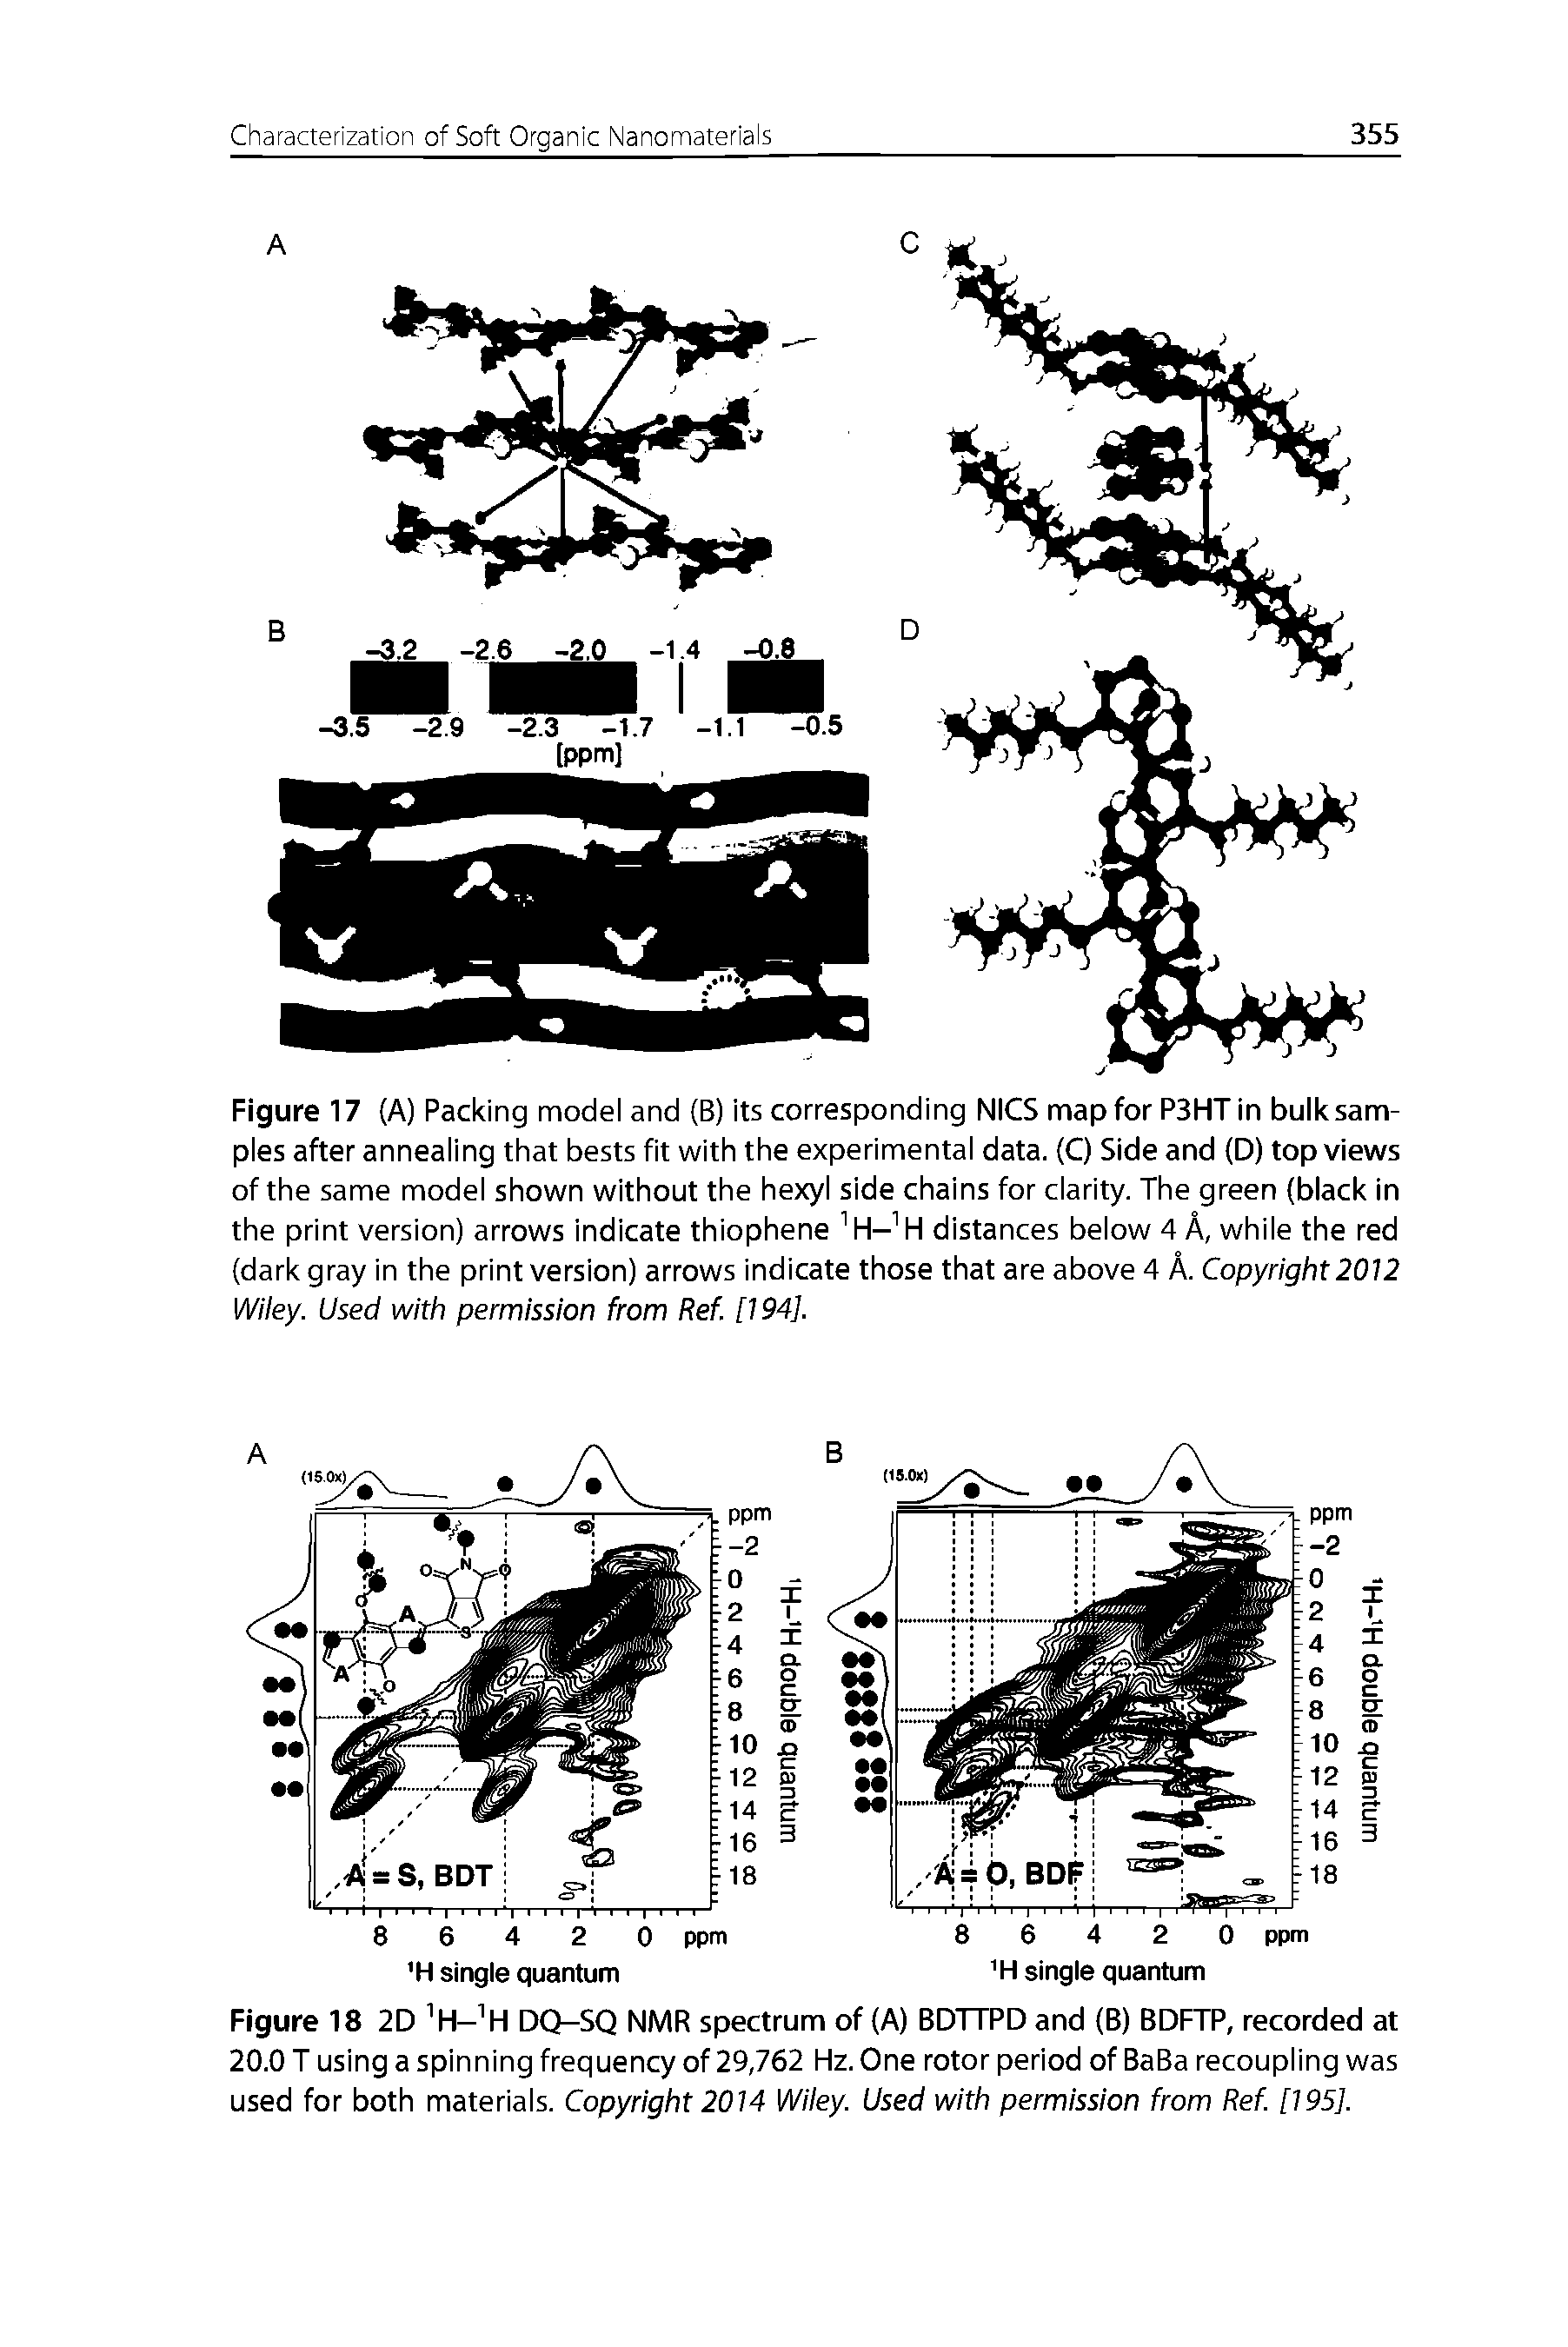 Figure 17 (A) Packing model and (B) its corresponding NICS map for P3HTin bulksam-ples after annealing that bests fit with the experimental data. (C) Side and (D) top views of the same model shown without the hexyl side chains for clarity. The green (biack in the print version) arrows indicate thiophene H- H distances below 4 A, while the red (dark gray in the print version) arrows Indicate those that are above 4 A. Copyright 2012 Wiley. Used with permission from Ref. [194].